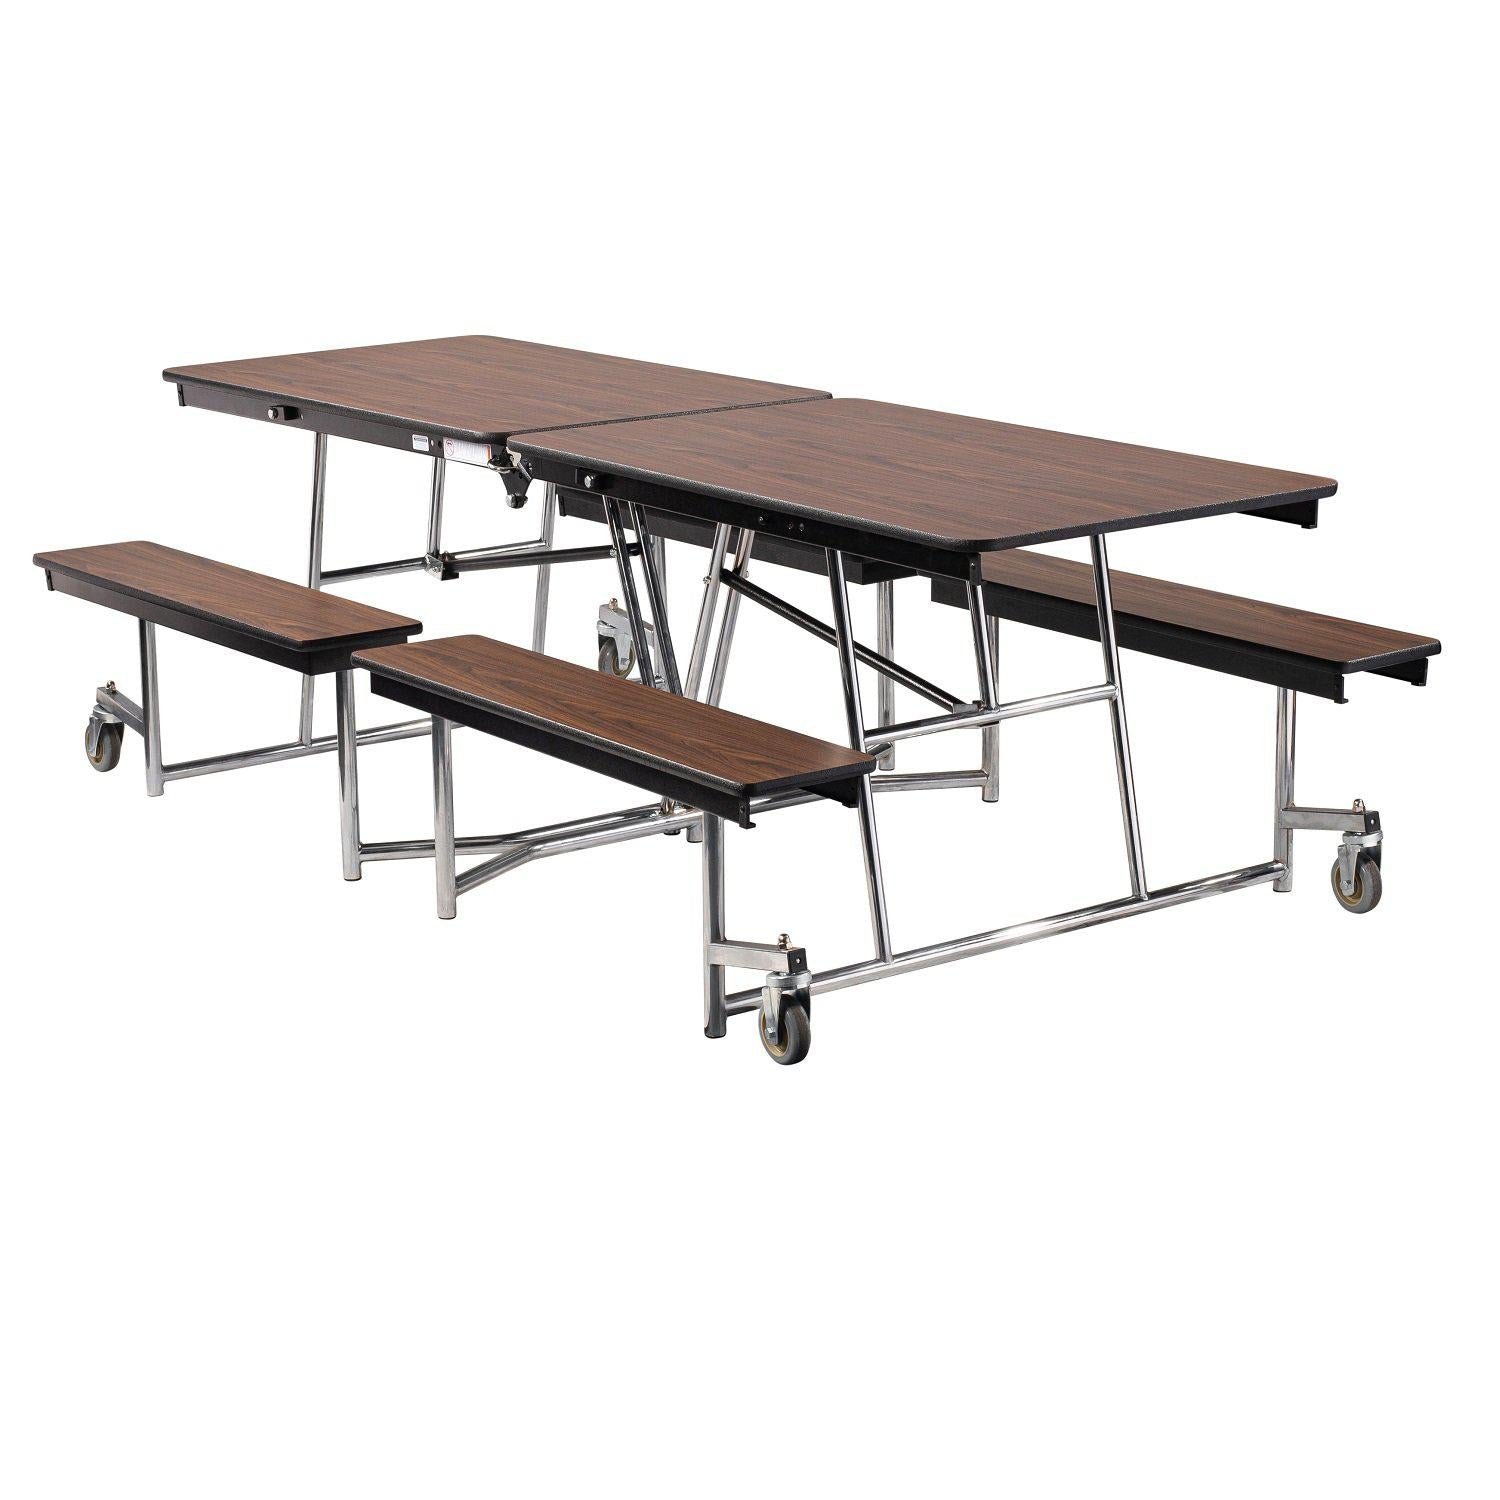 Mobile Cafeteria Table with Benches, 8'L, MDF Core, Black ProtectEdge, Chrome Frame